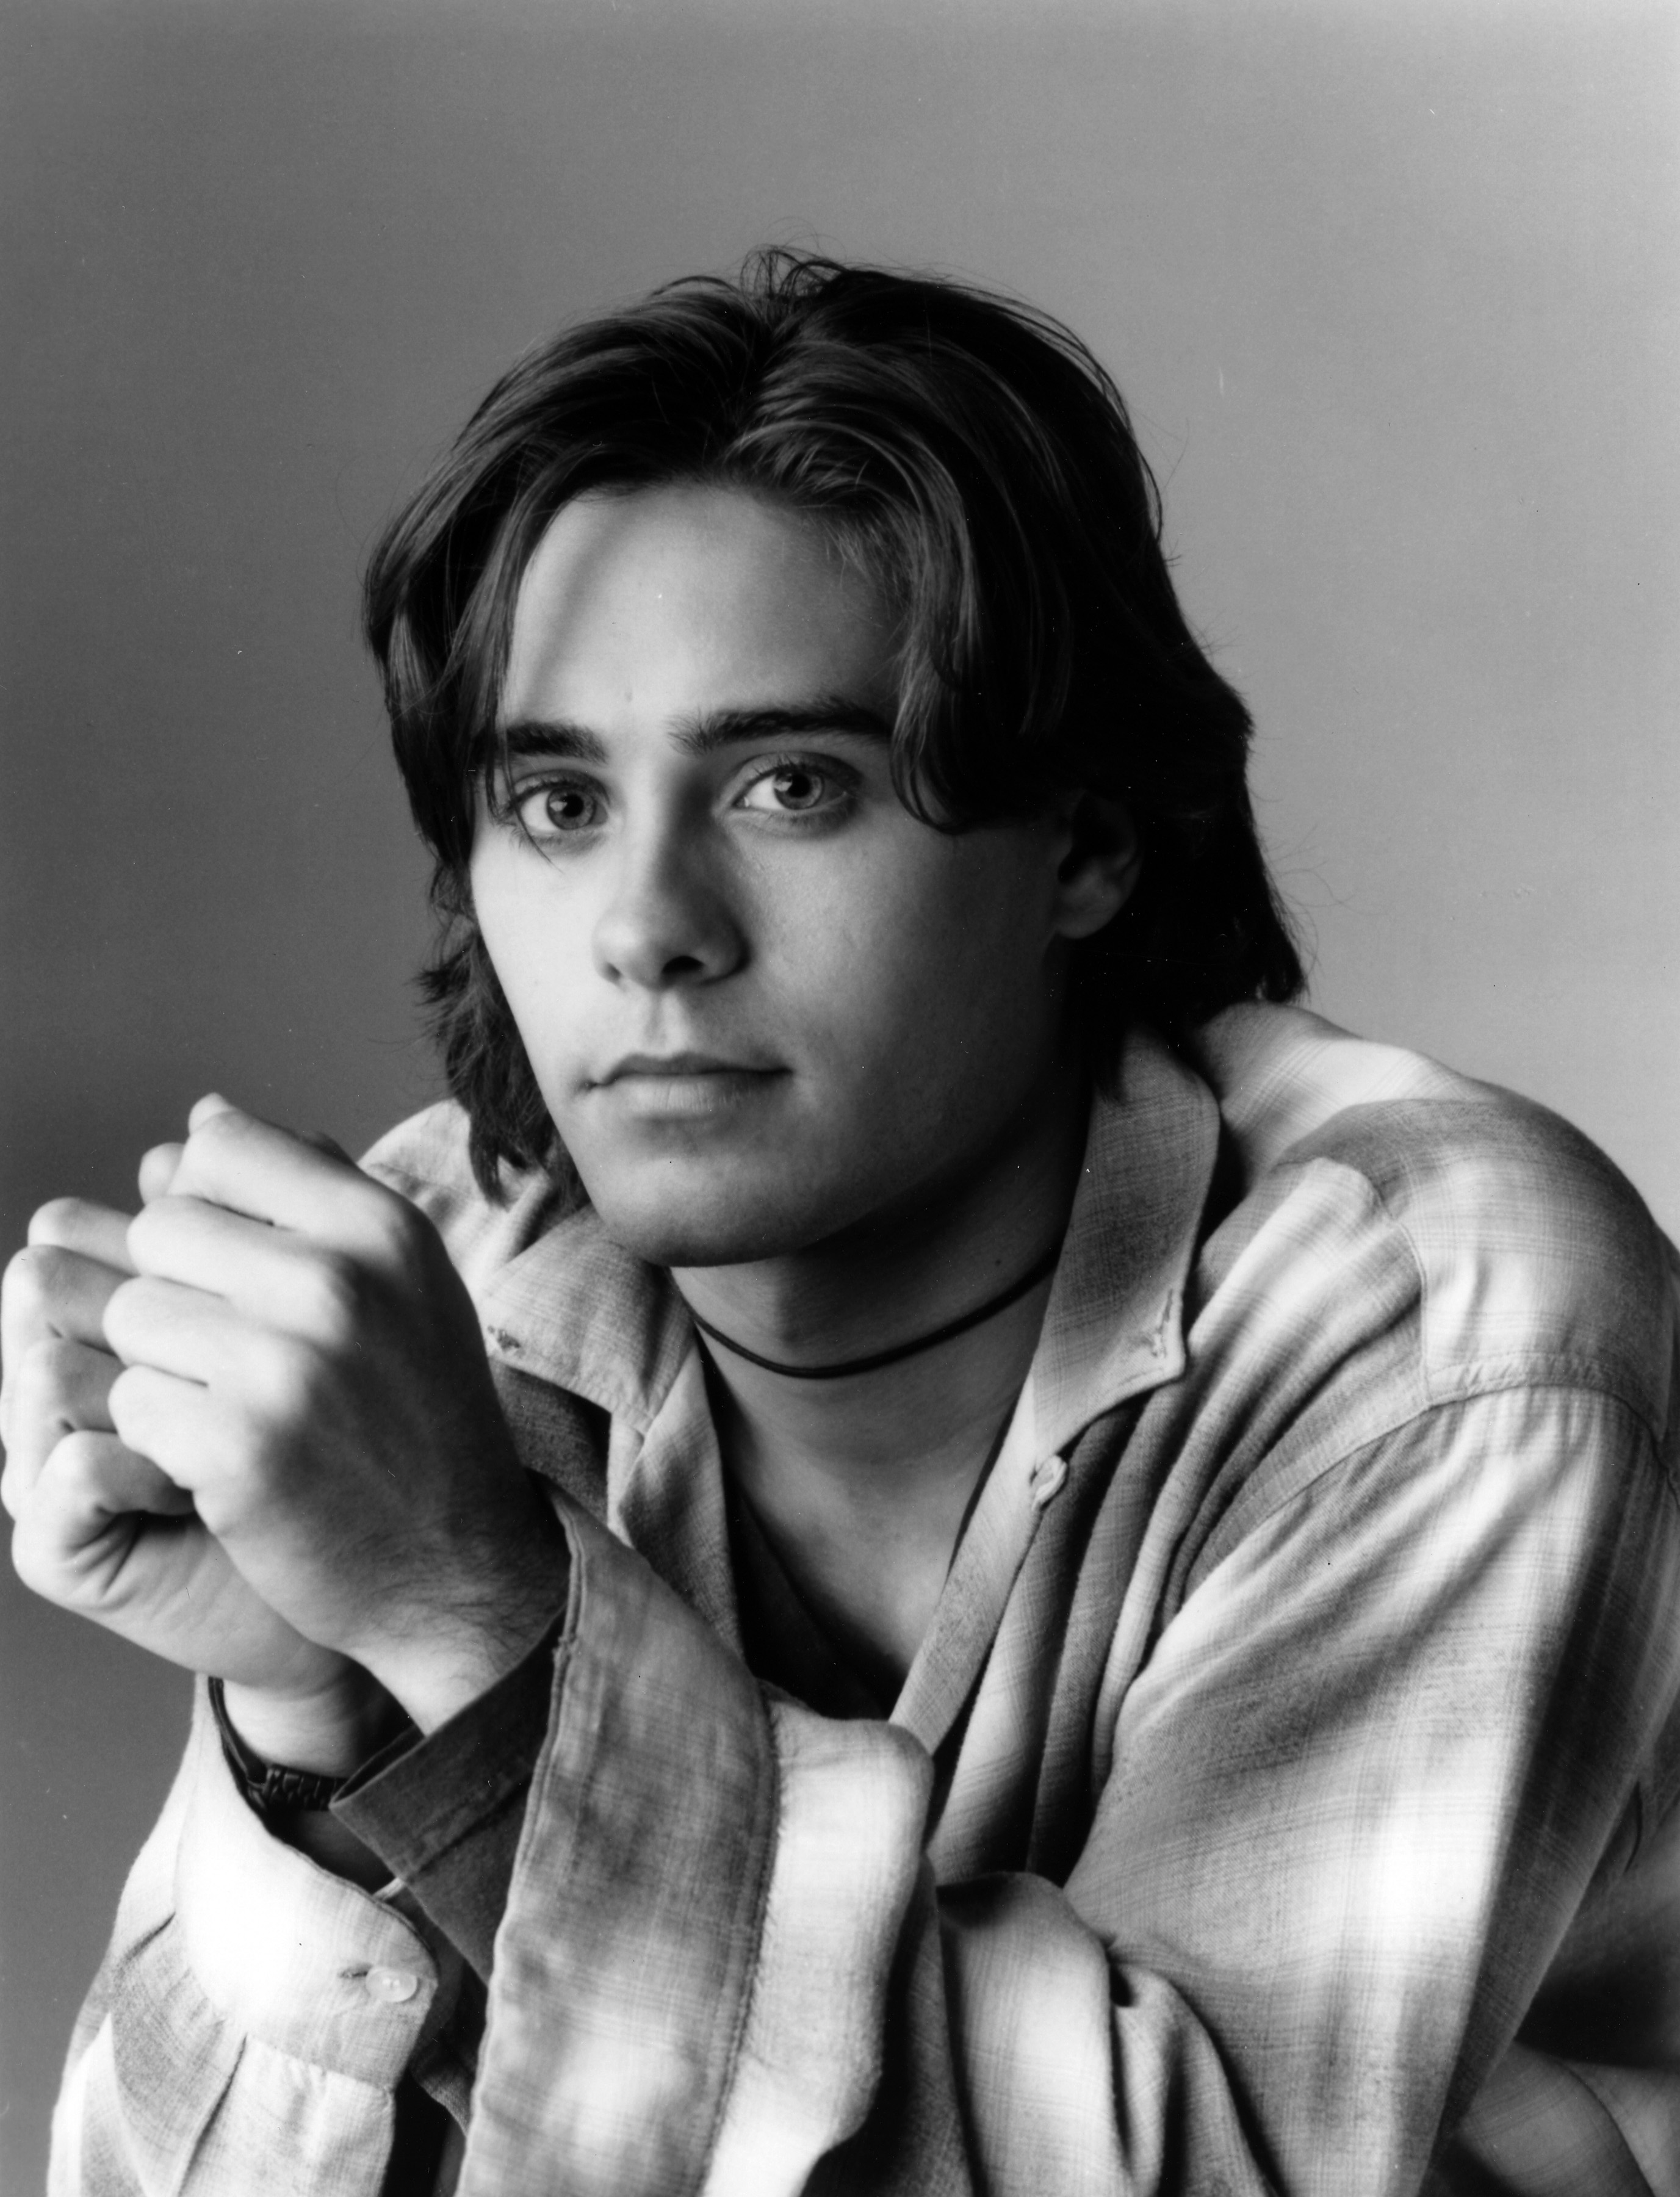 Jared Leto on March 30, 1994 | Source: Getty Images